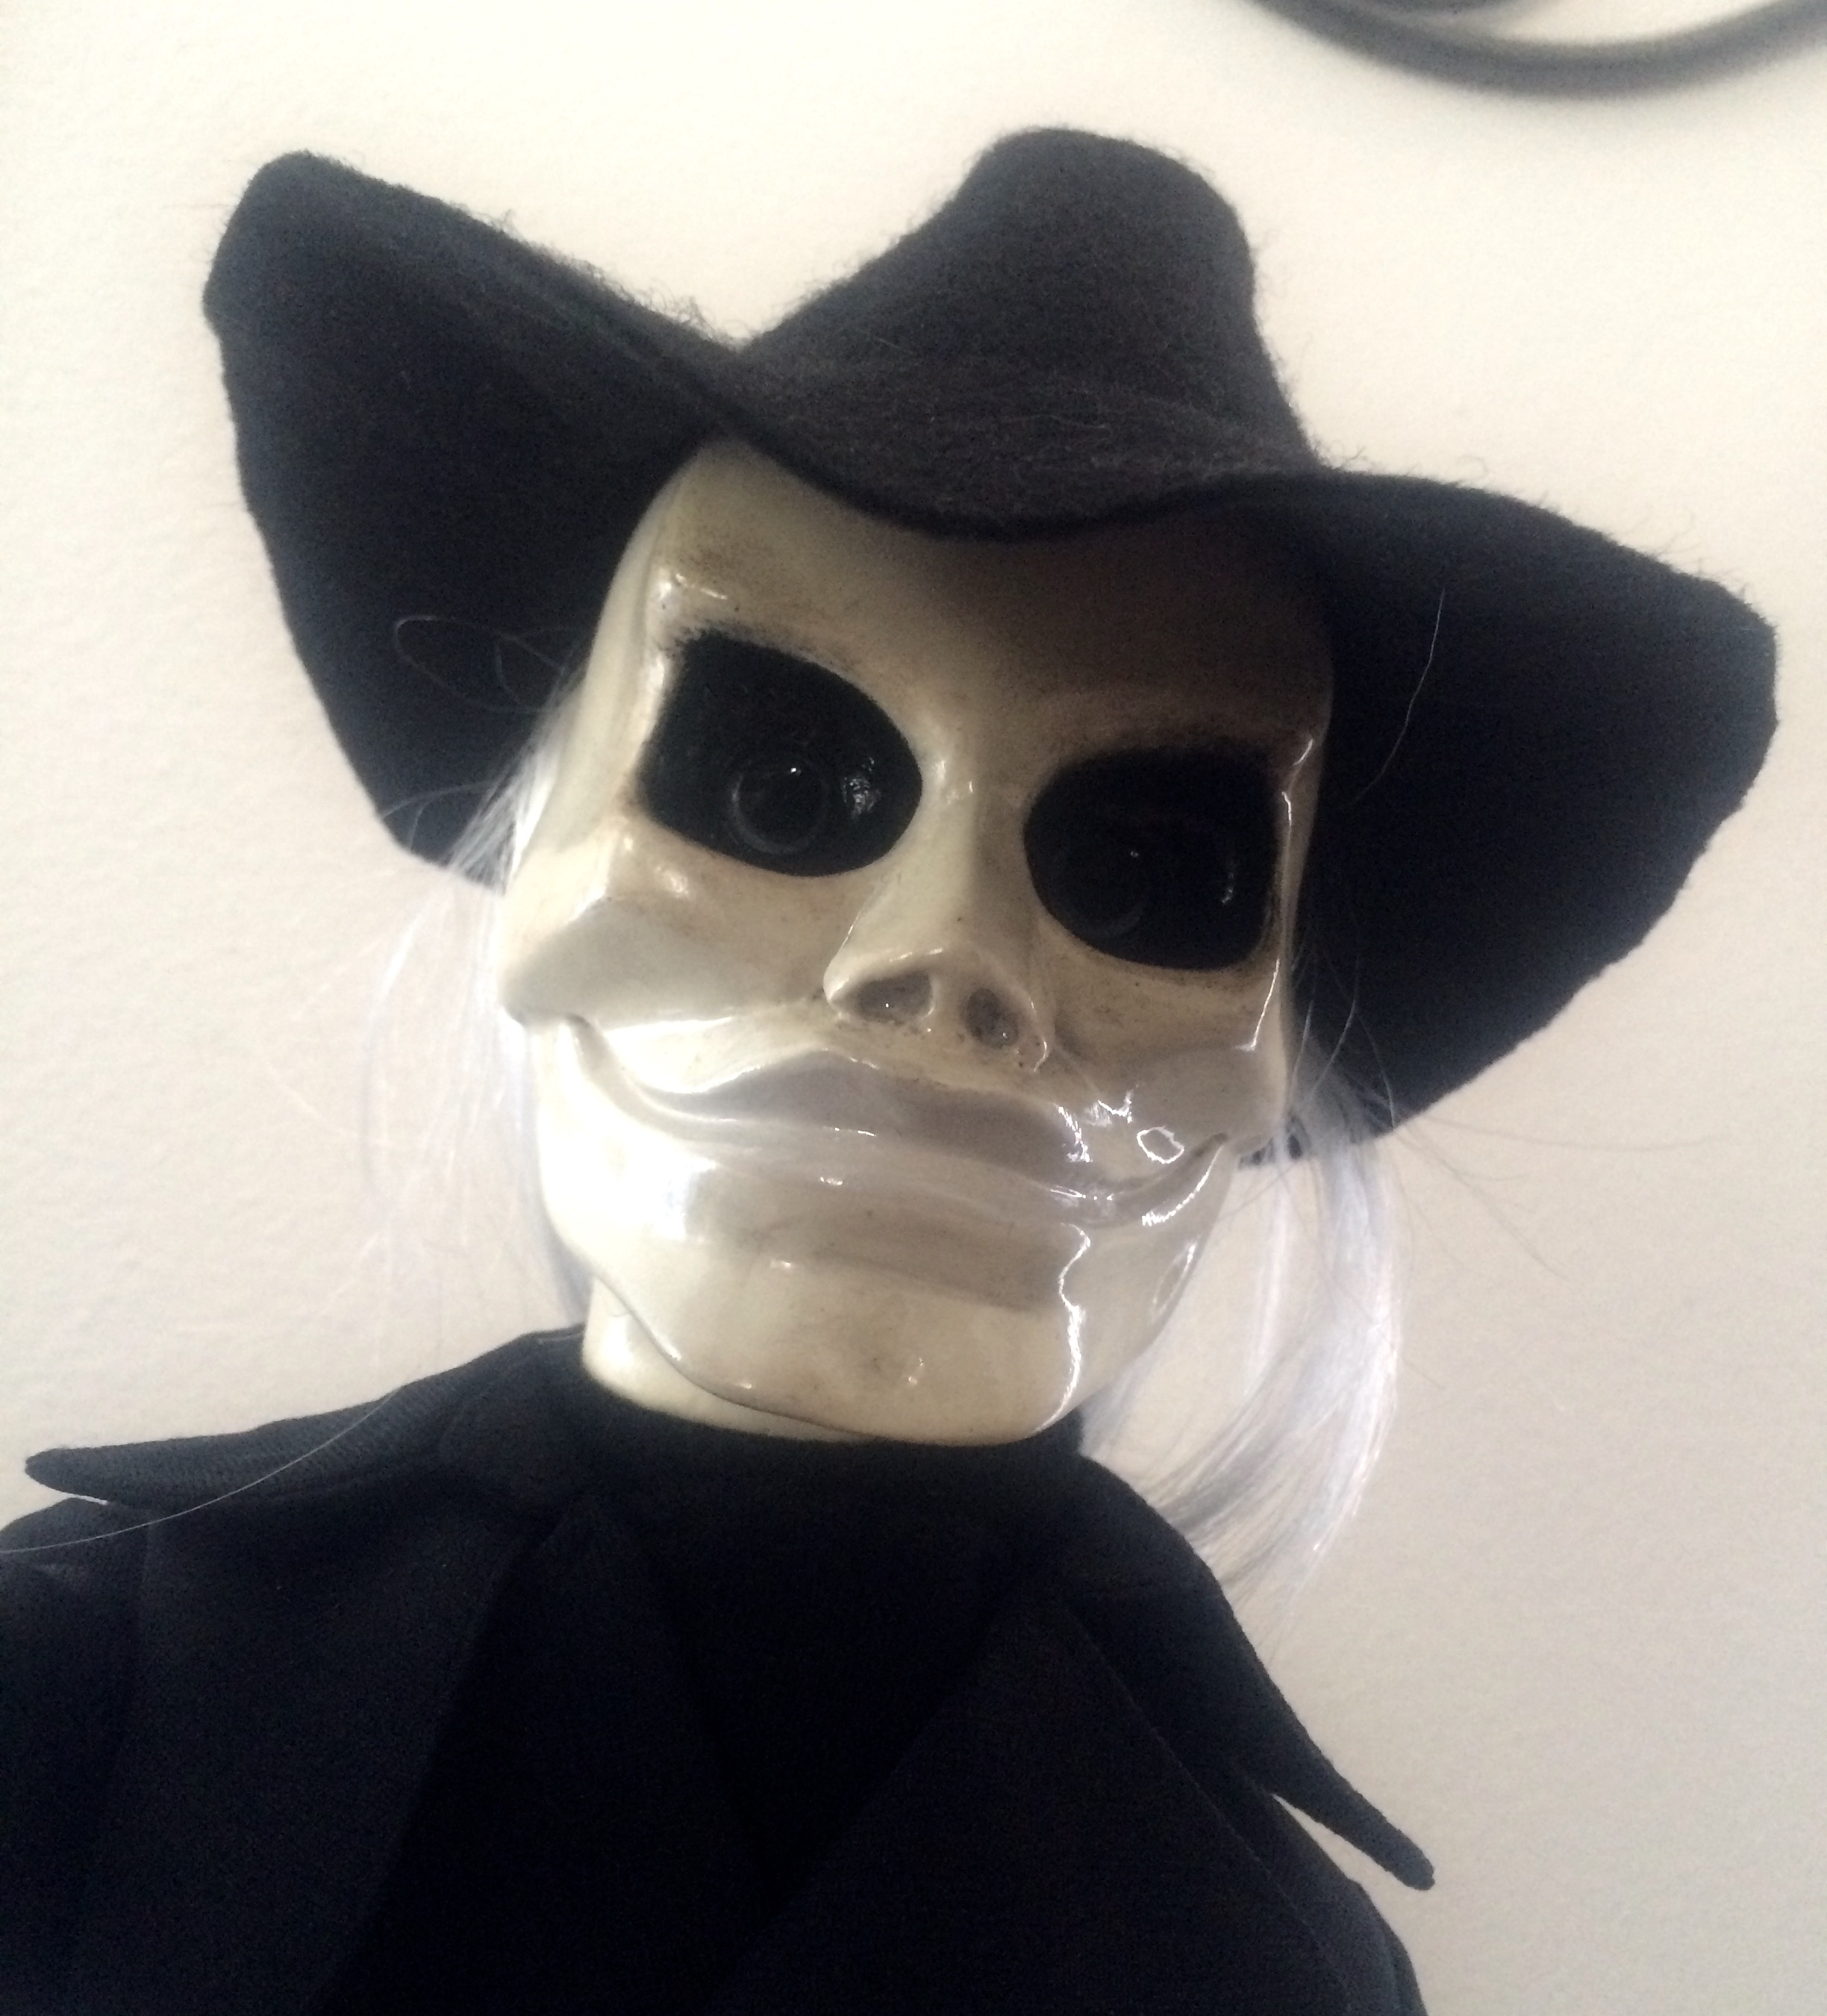 Recently I made a life sized replica of the Puppet mask for a